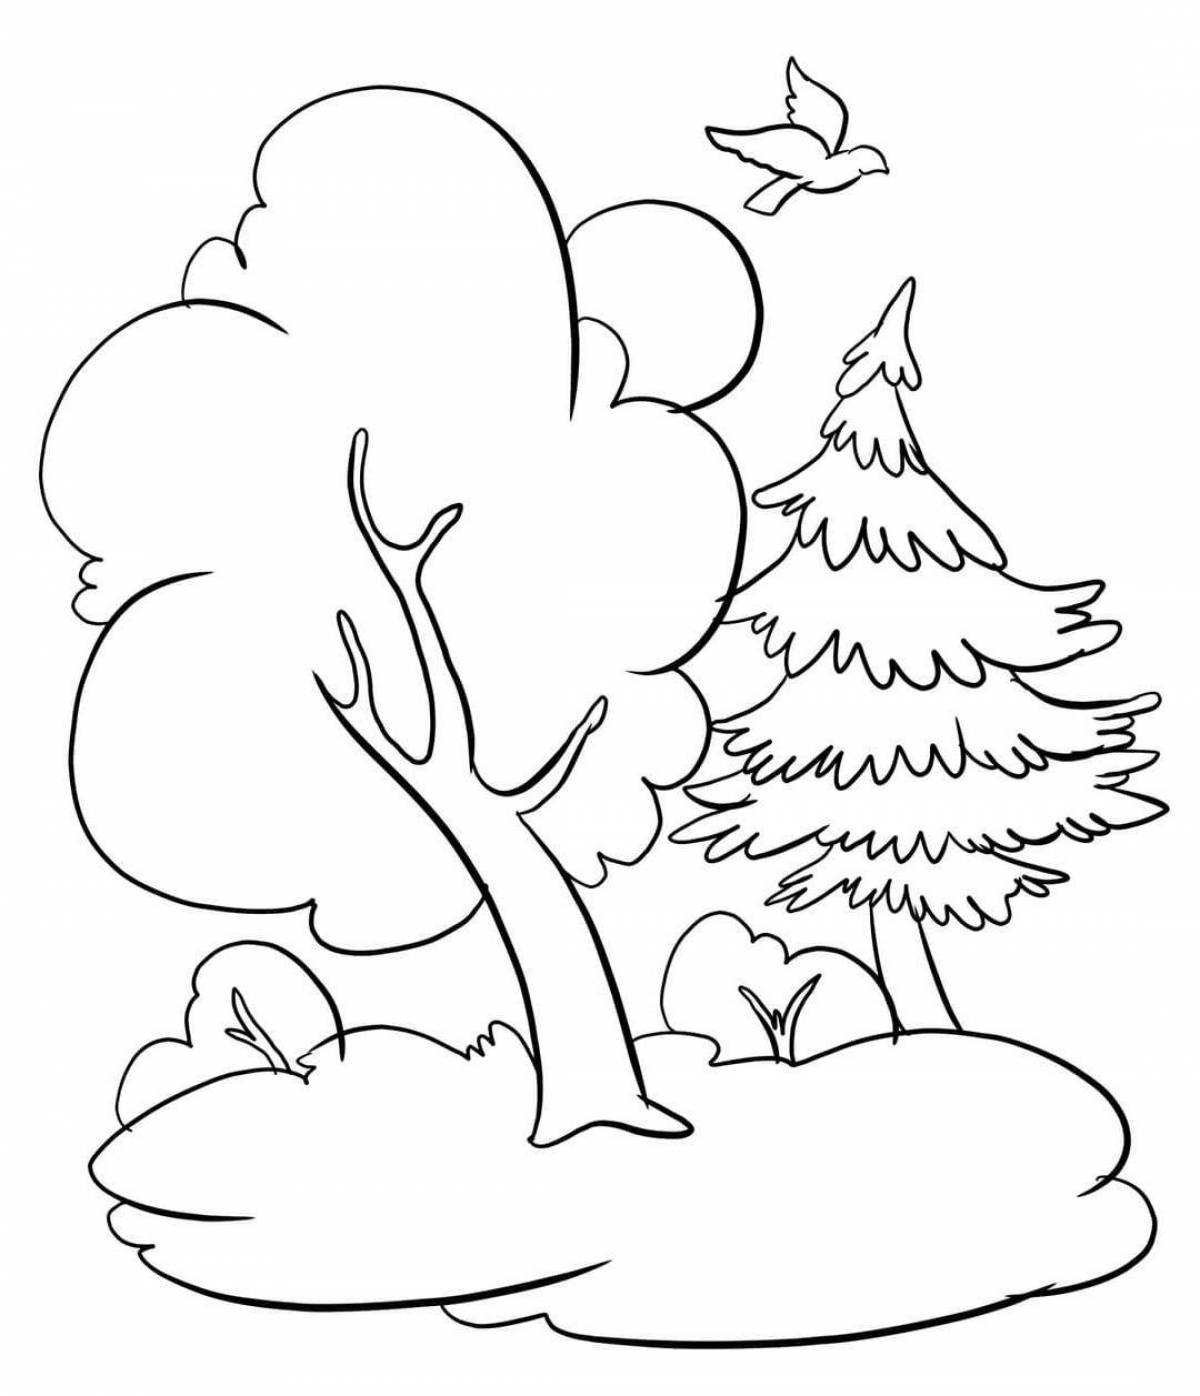 Glittering tree coloring page for 6-7 year olds